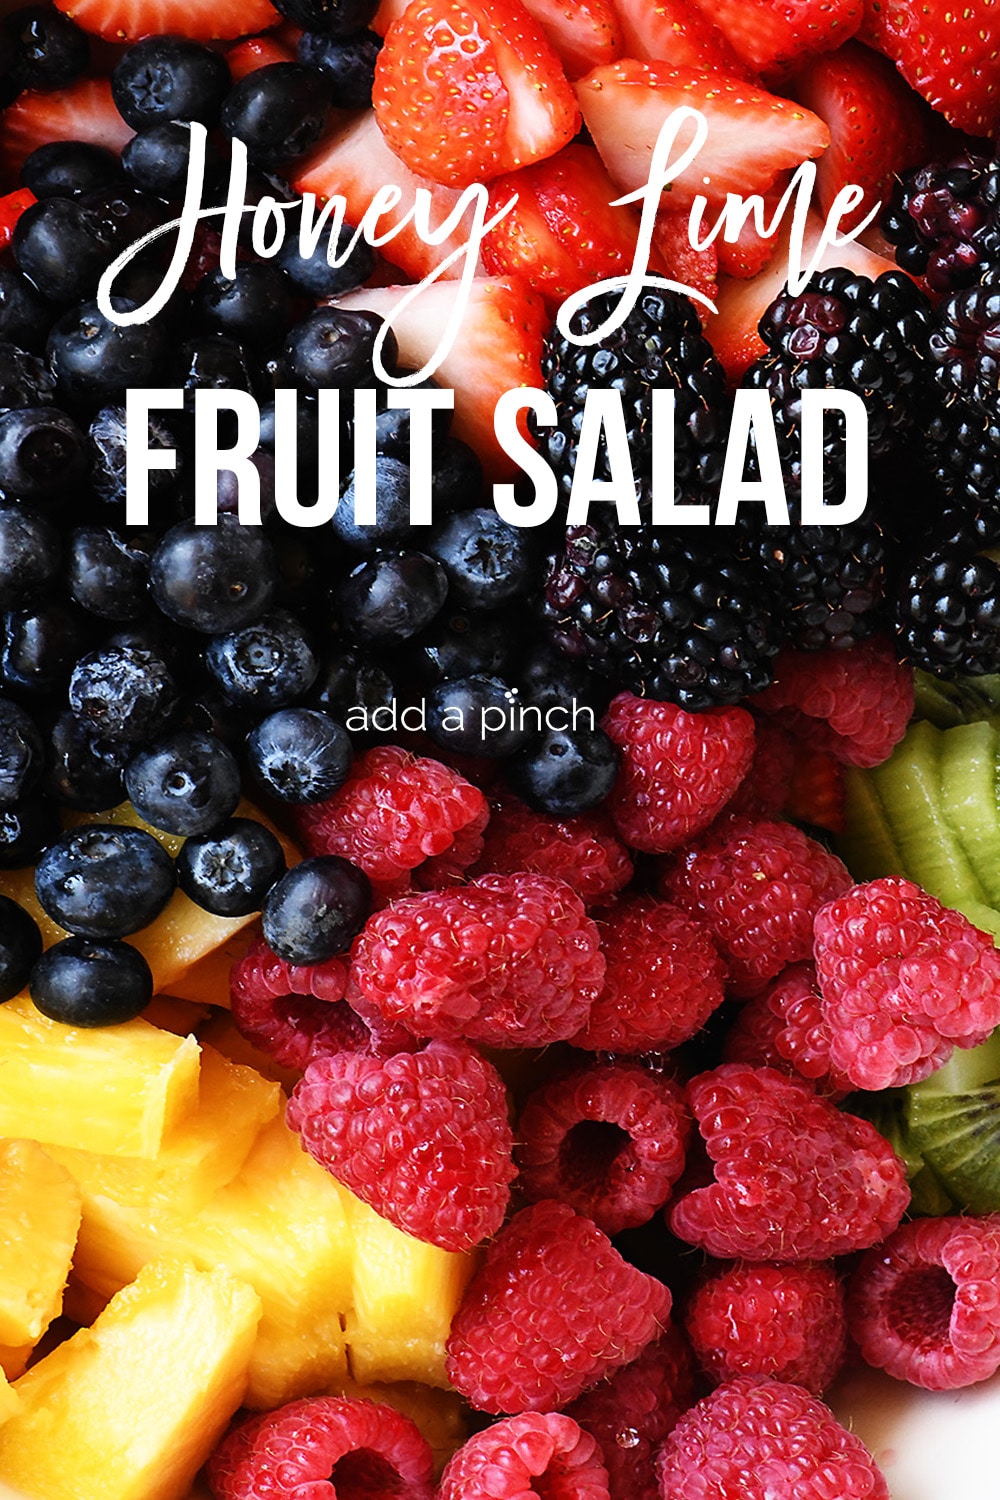 Honey Lime Fruit Salad with many colorful fresh fruits mixed in a tangy honey lime dressing - with text - addapinch.com